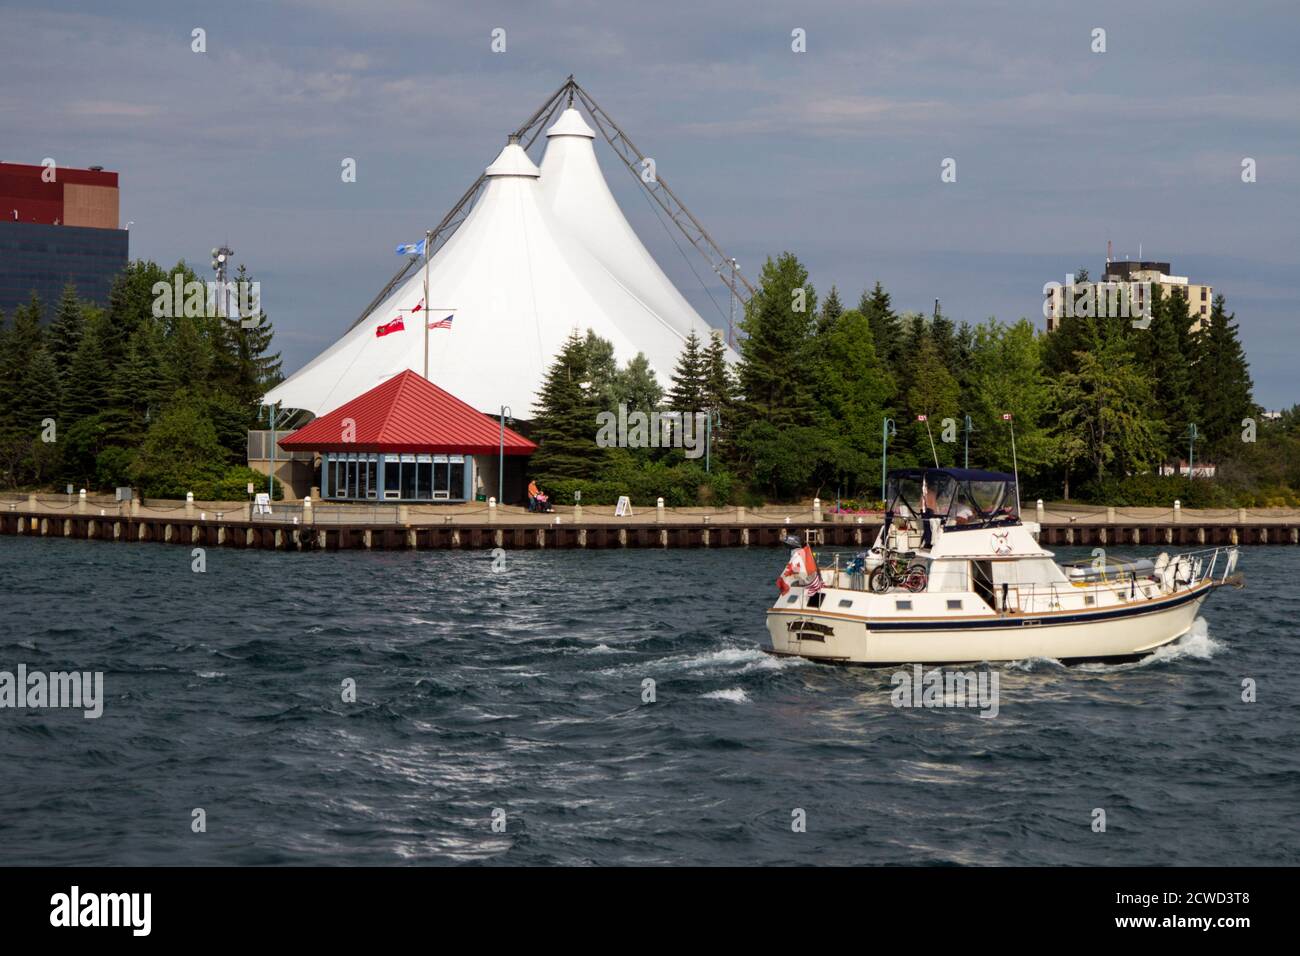 Sault Ste Marie, Ontario, Canada - August 9, 2015: The waterfront district of the small town of Sault Ste Marie, Ontario located on the Great Lakes. Stock Photo